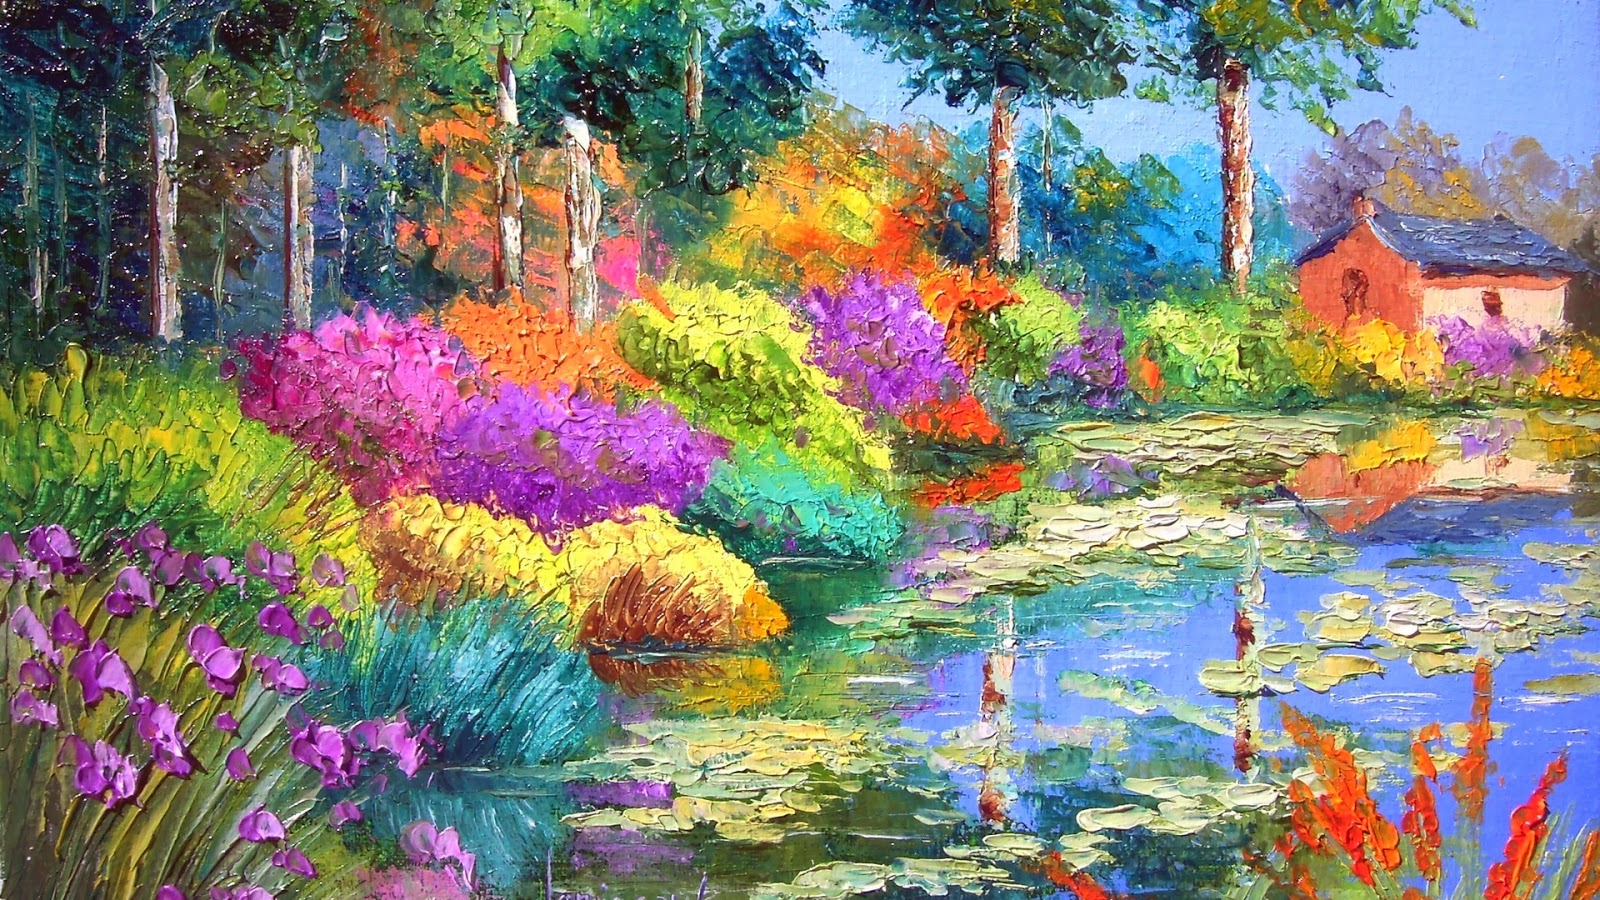 nature-pong-with-beautiful-flowers-park-oil-painting-image.jpg